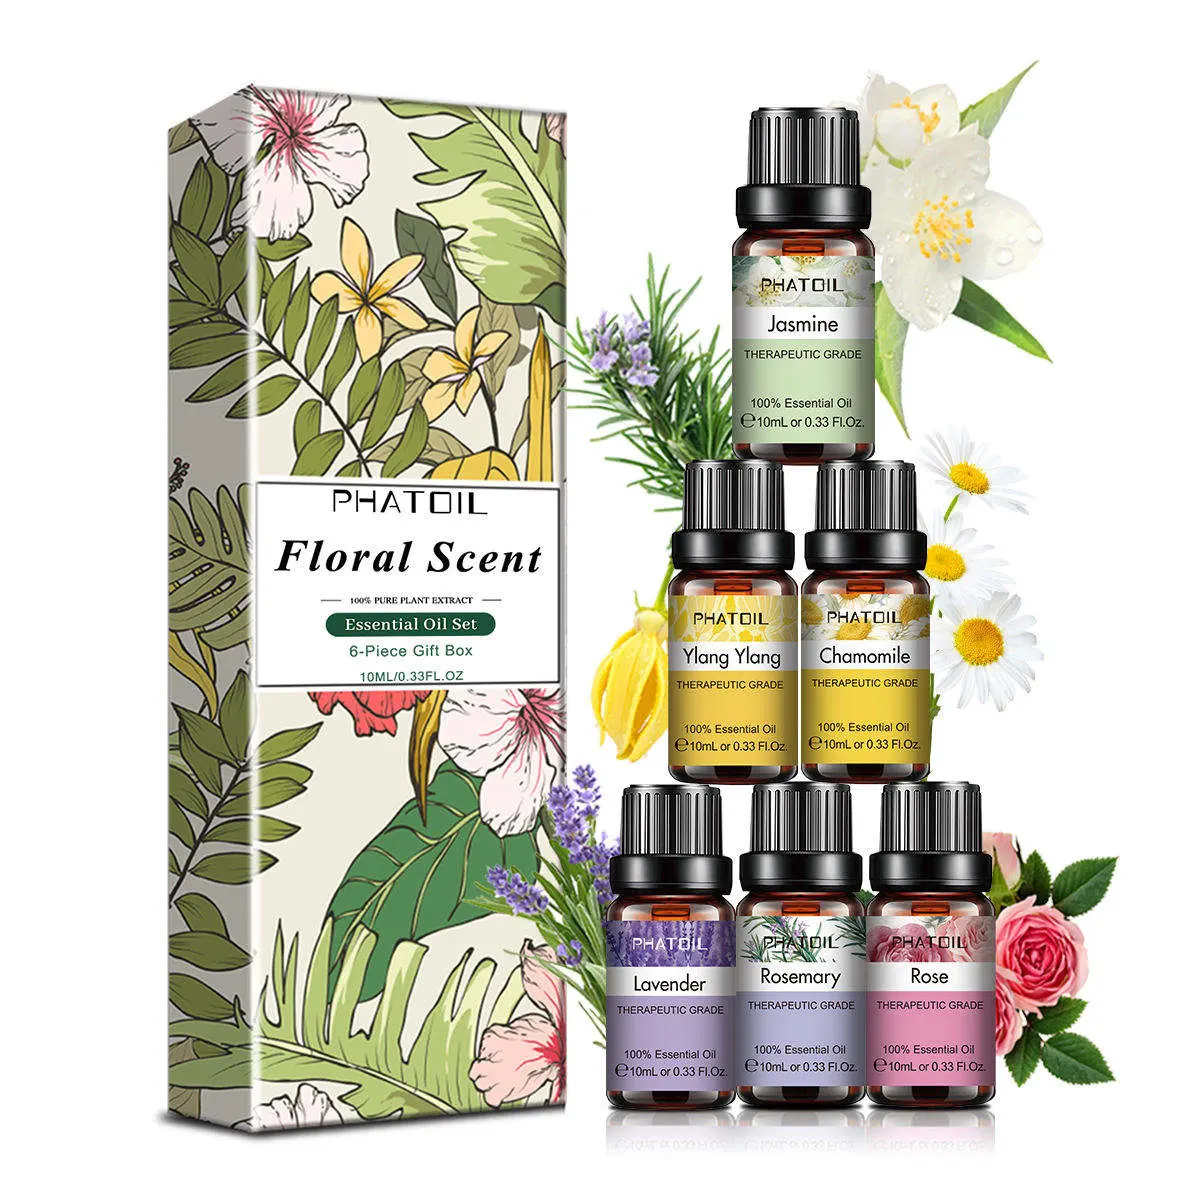 Wholesale oil quality care set Natural Organic Rose Lavender Massage Hair Face Body Care Essential Oil Use massage oils body